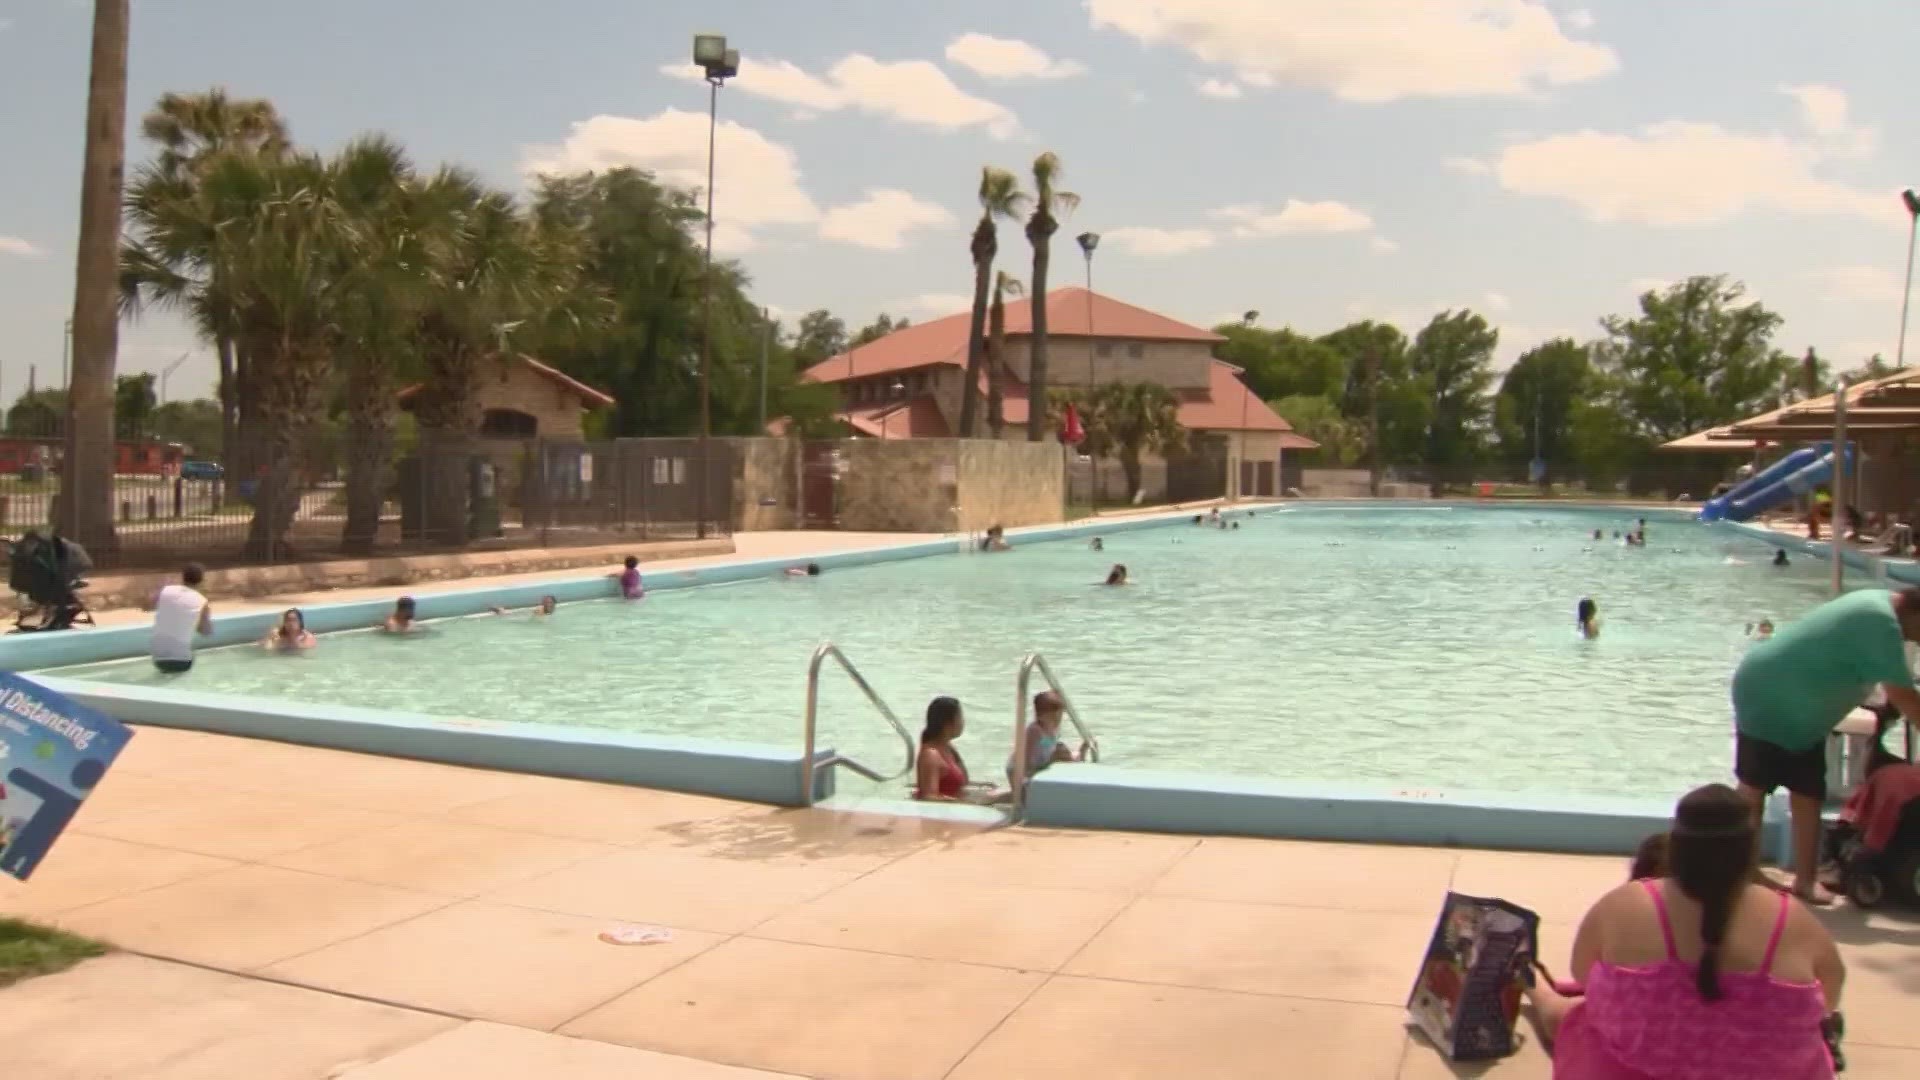 The pools were going to open this weekend, but now they are not due to expected bad weather.